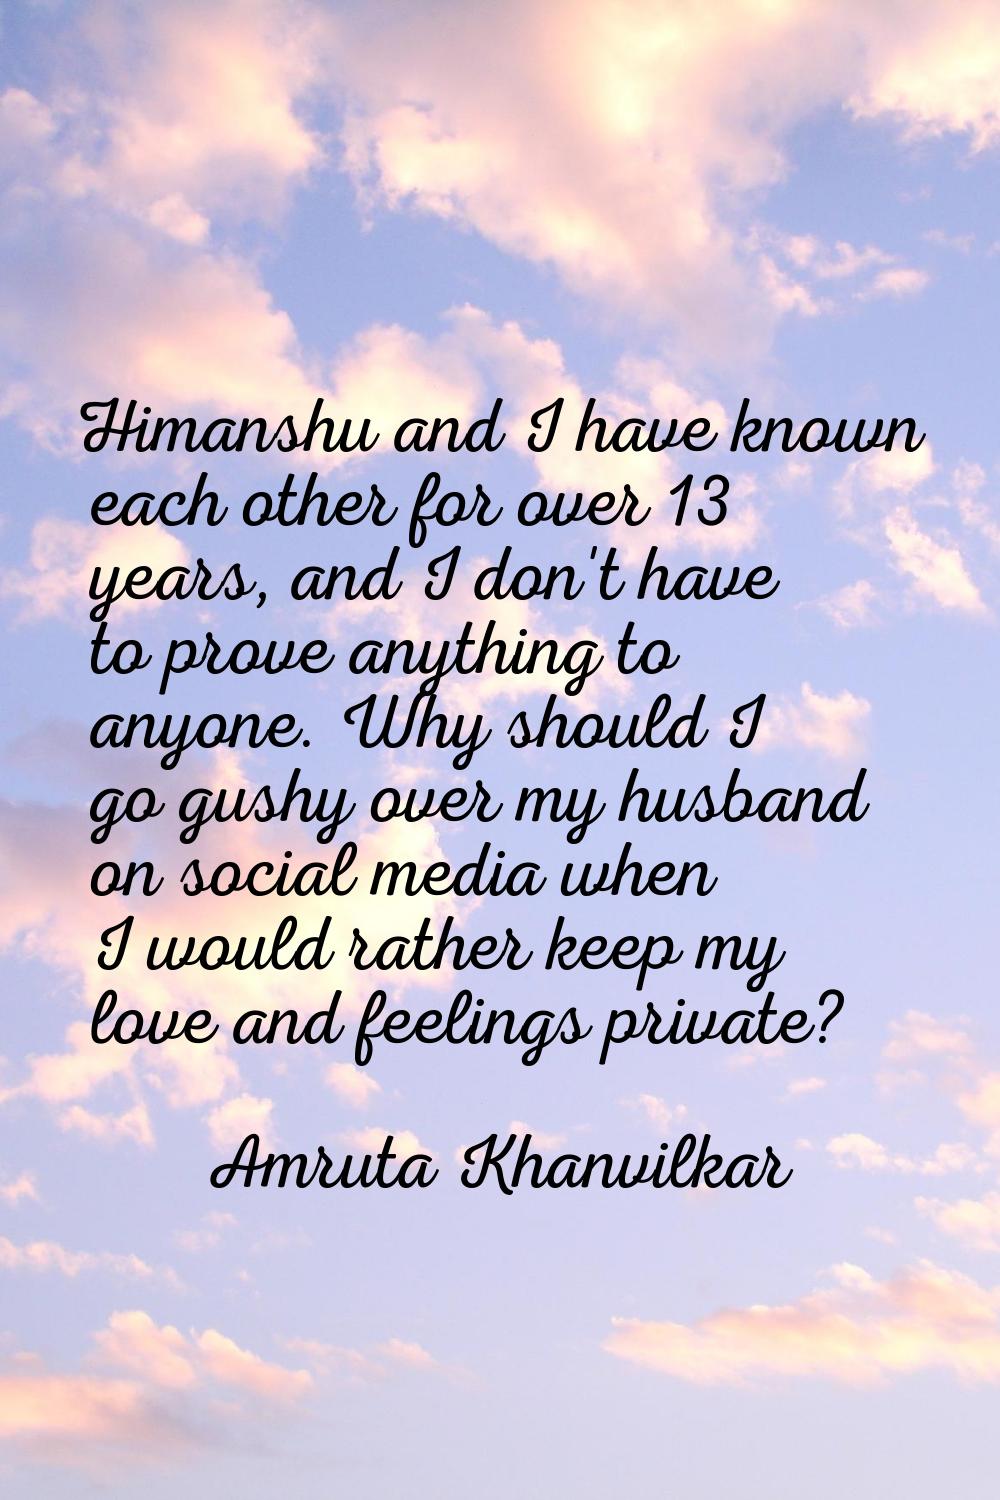 Himanshu and I have known each other for over 13 years, and I don't have to prove anything to anyon